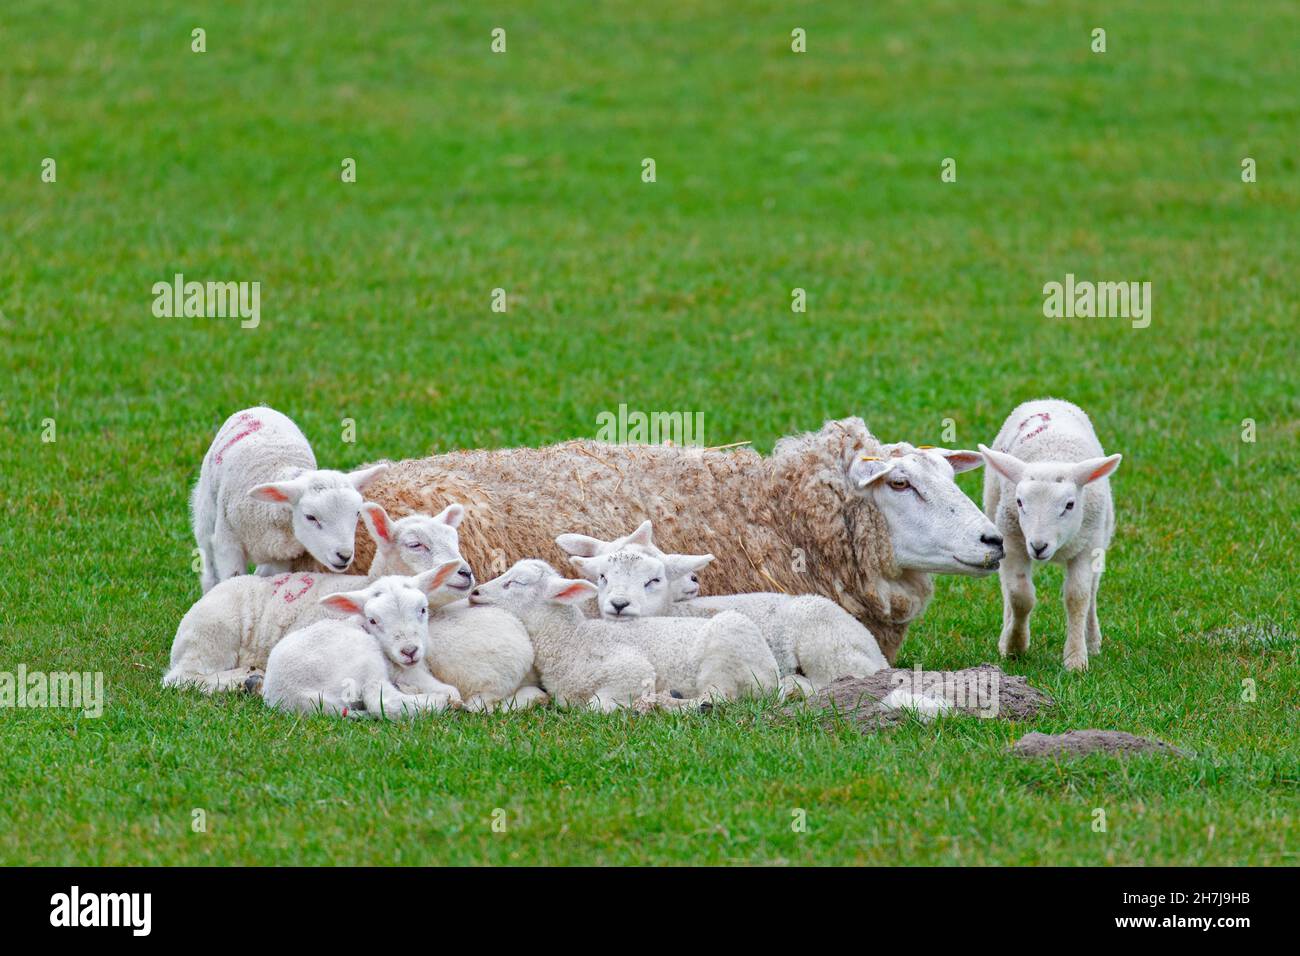 Domestic sheep ewe with seven white lambs resting huddled together in field / pasture Stock Photo